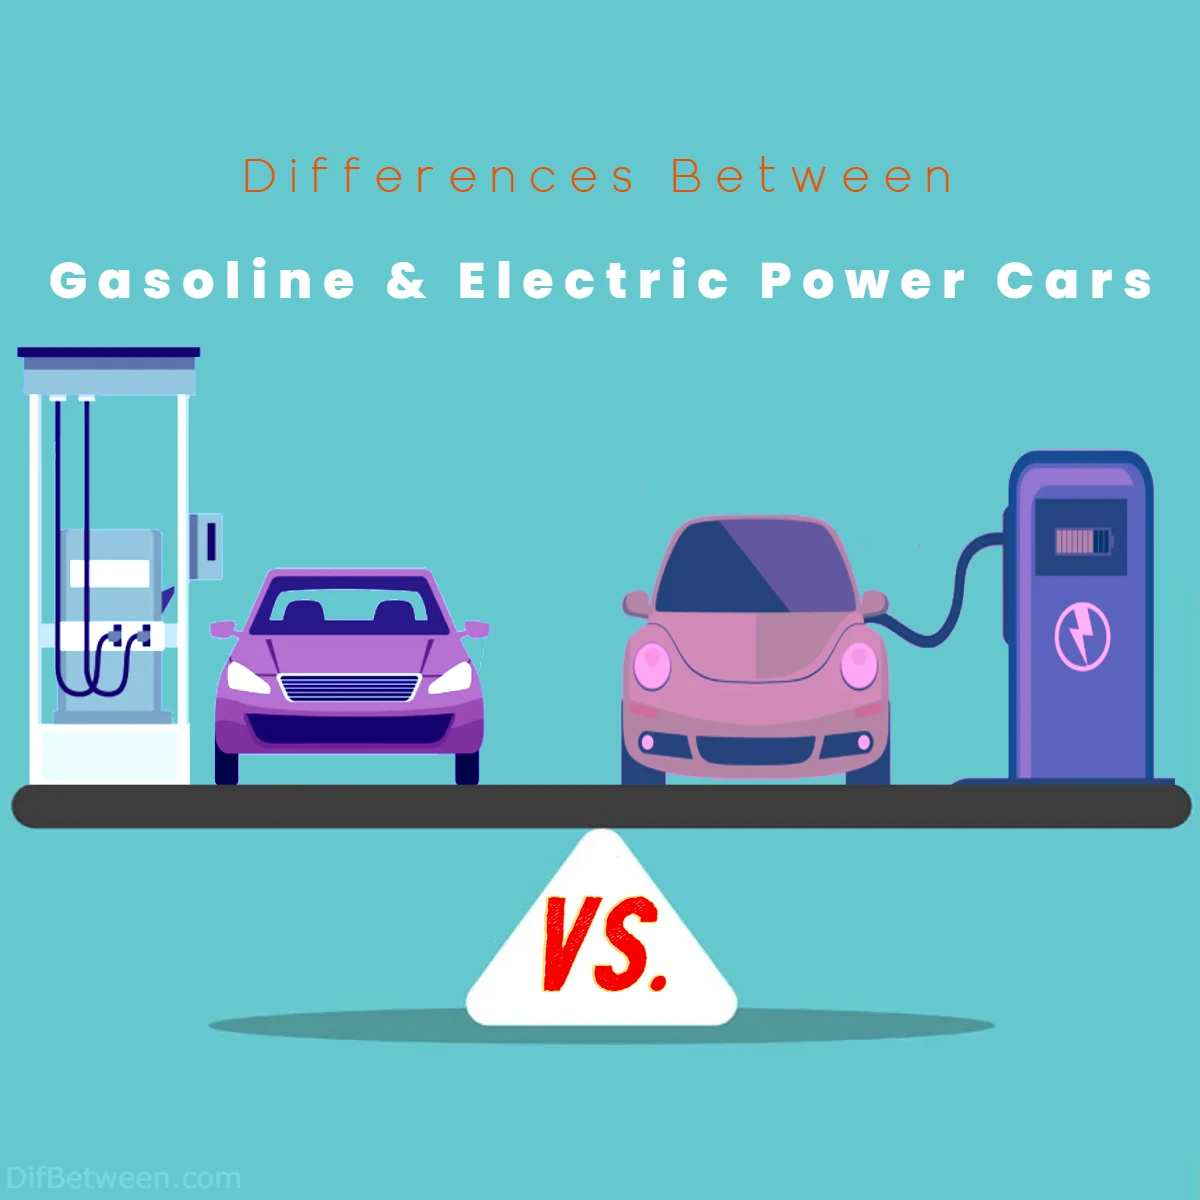 difference between Electric powered cars and Gasoline powered cars